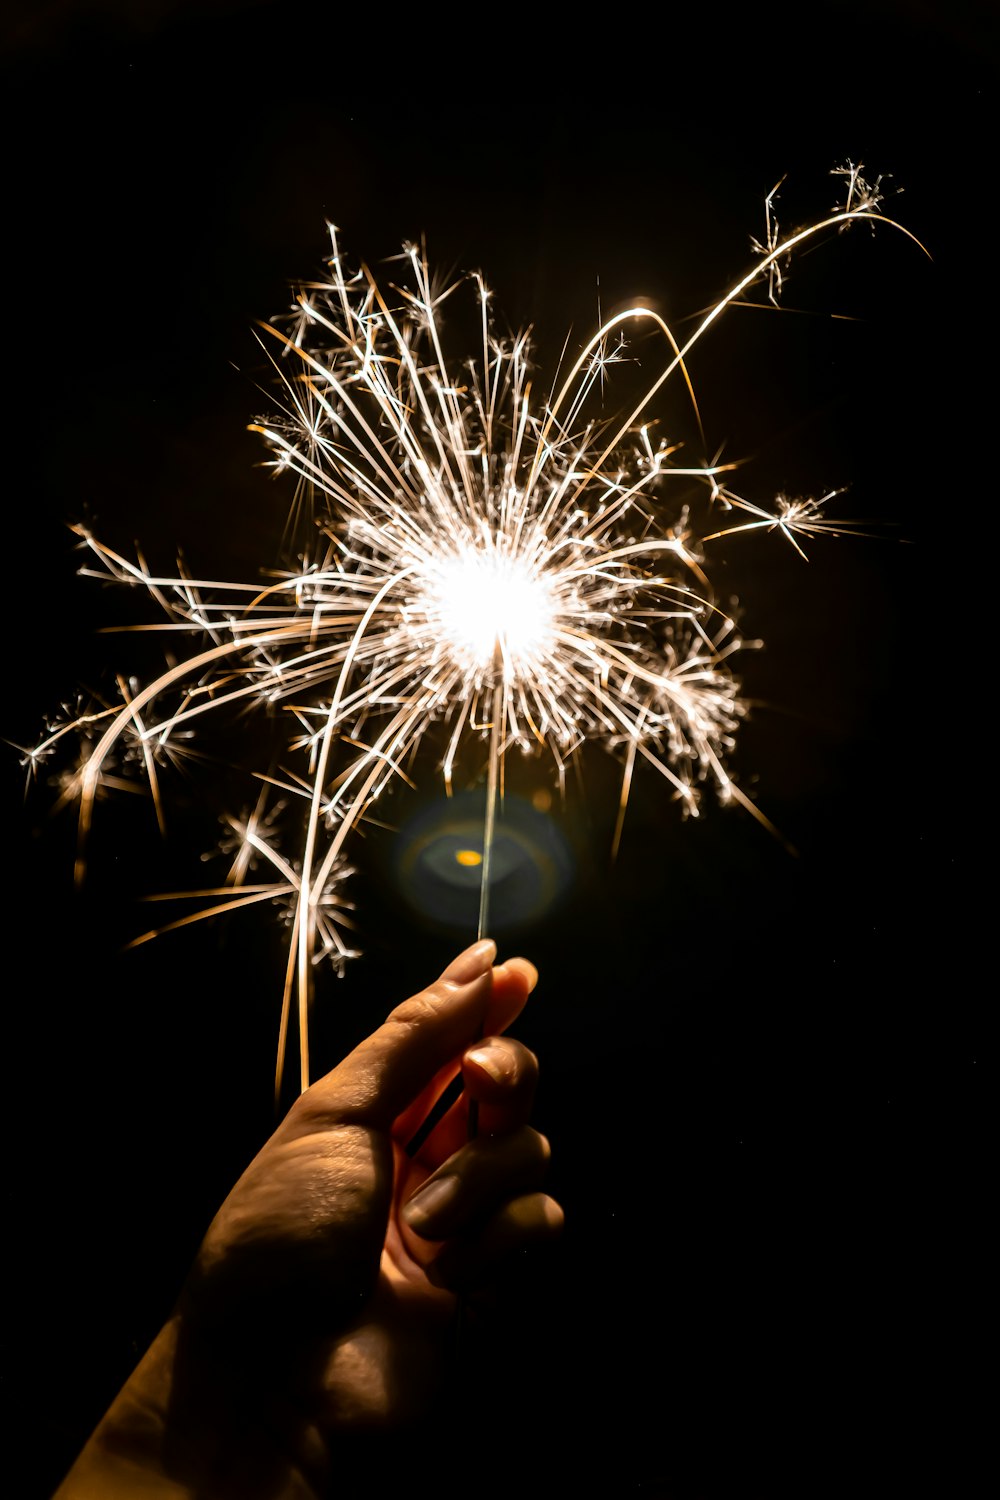 person holding white fireworks during nighttime